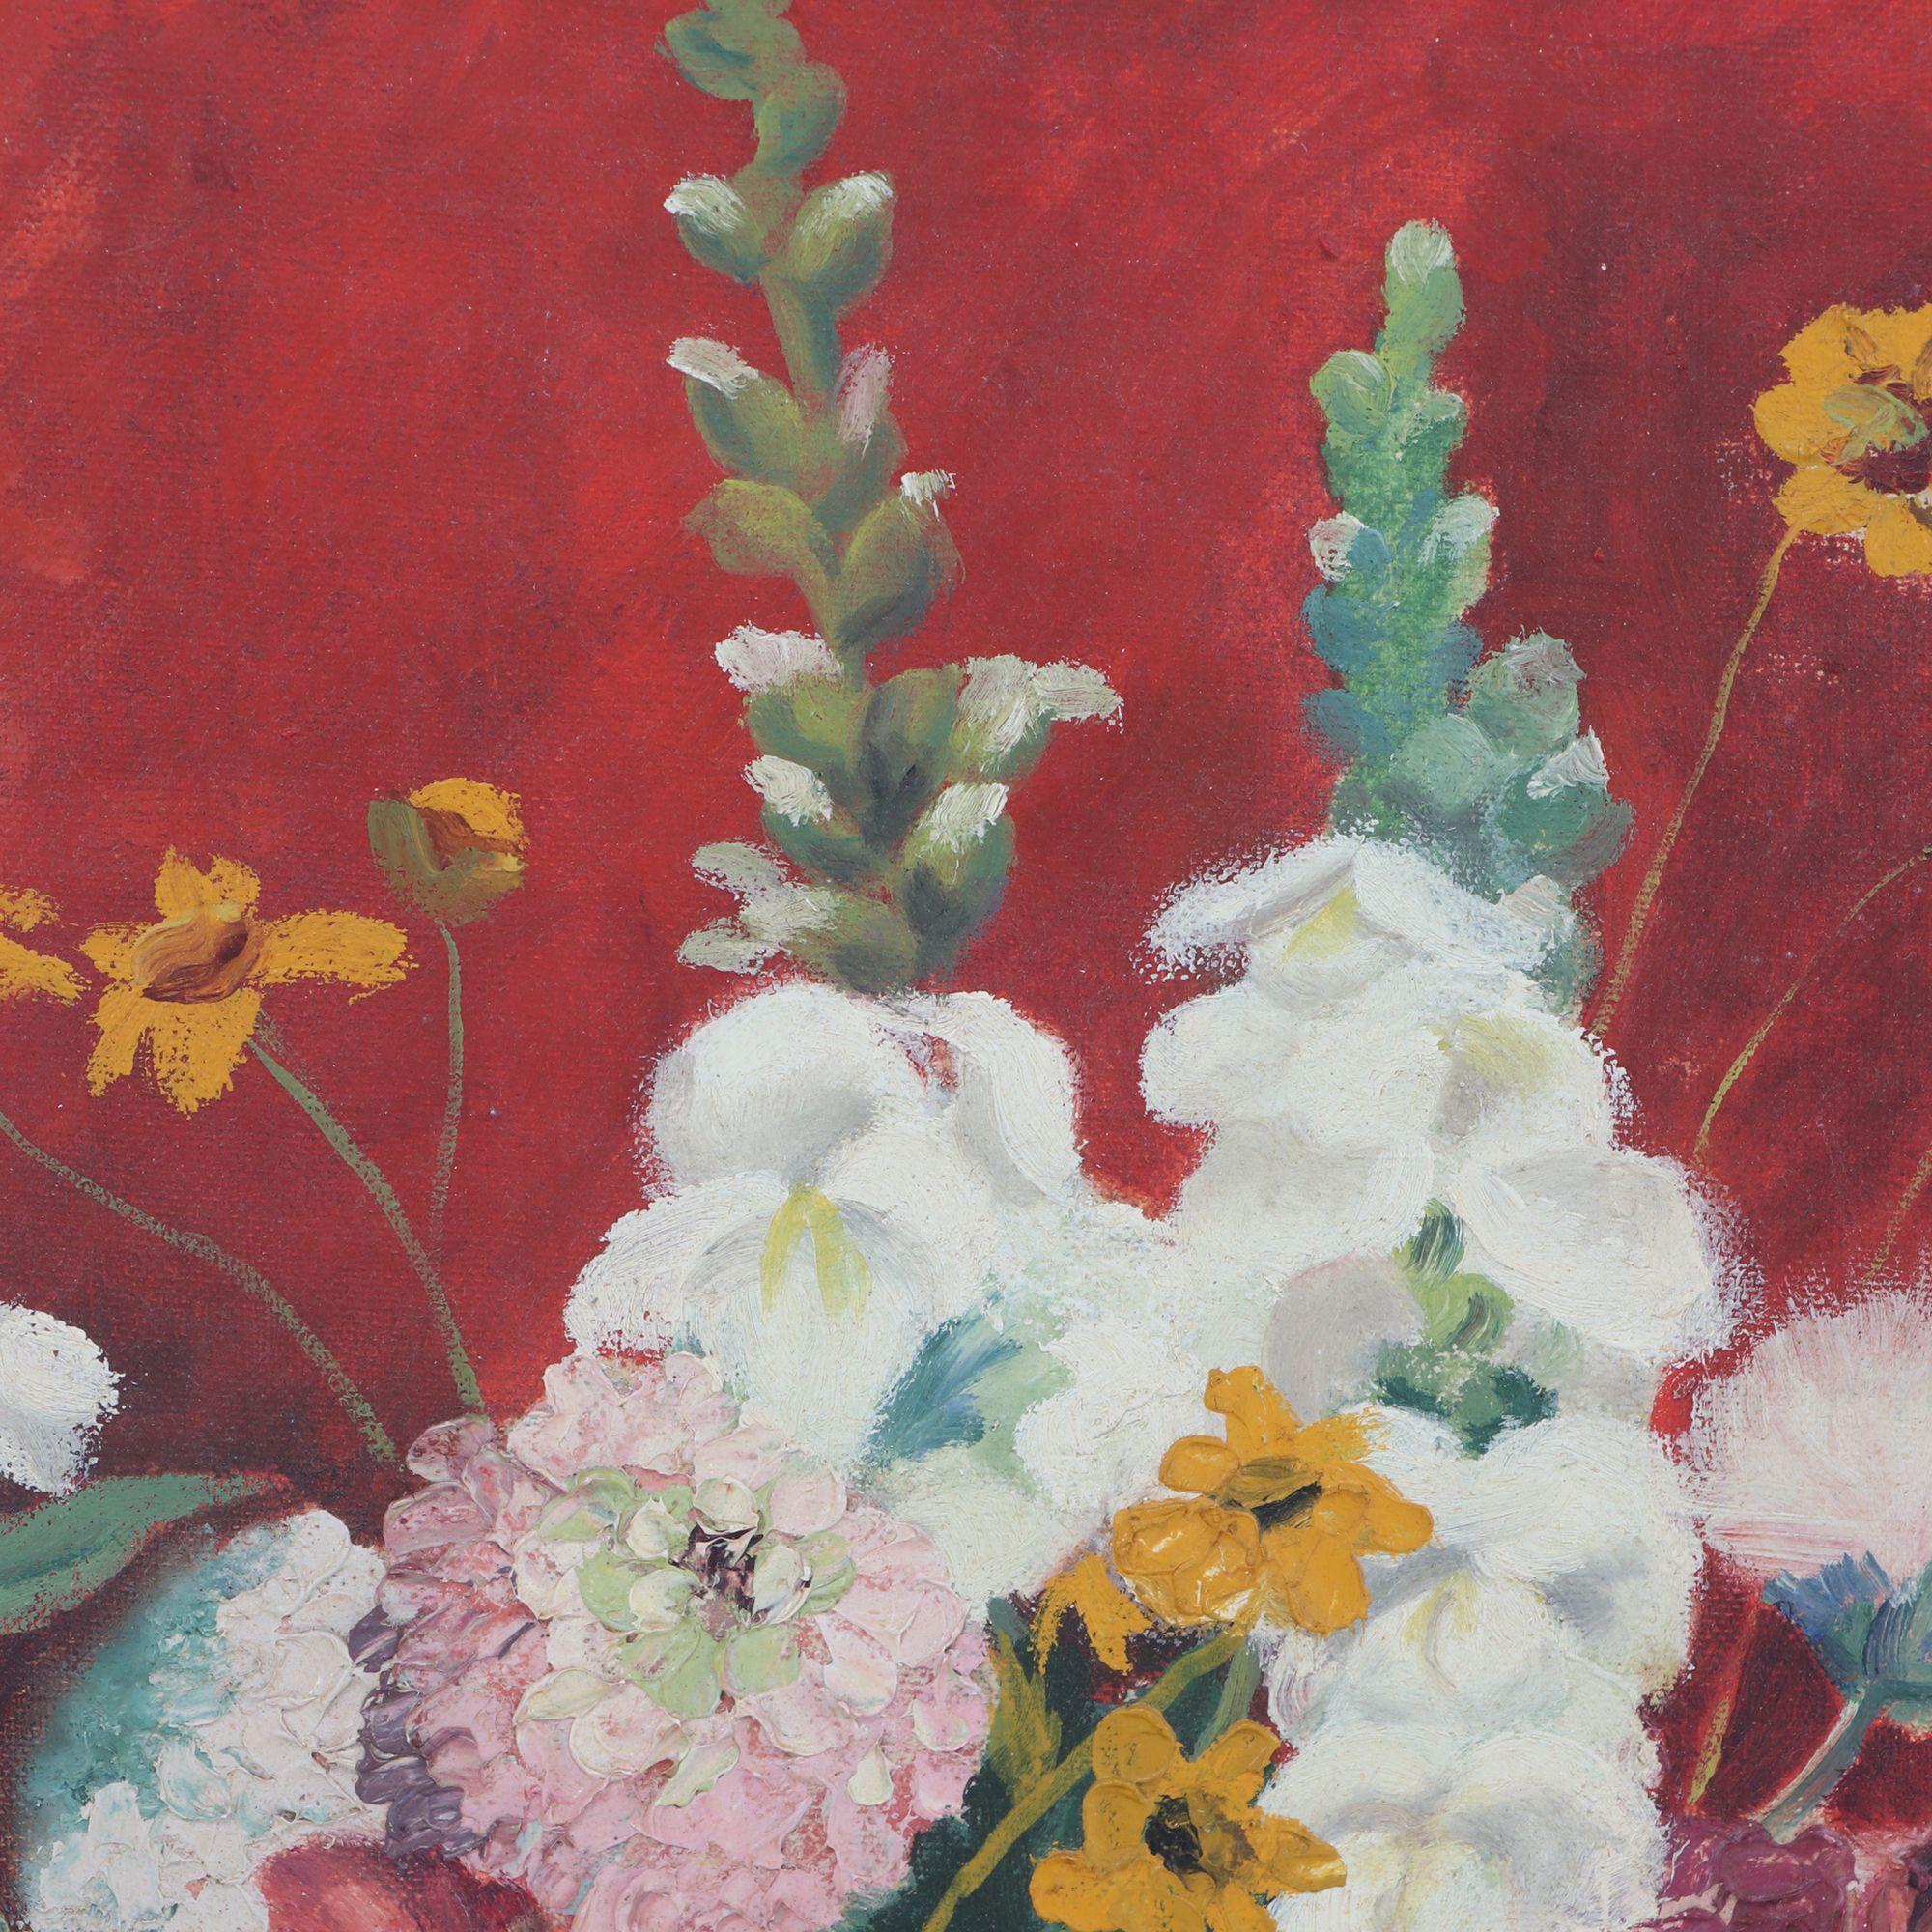 Original floral oil painting on board. Still life depicting a bouquet of pink, yellow and white flora in a yellow and green vase pitcher against a red background. Artist signature 